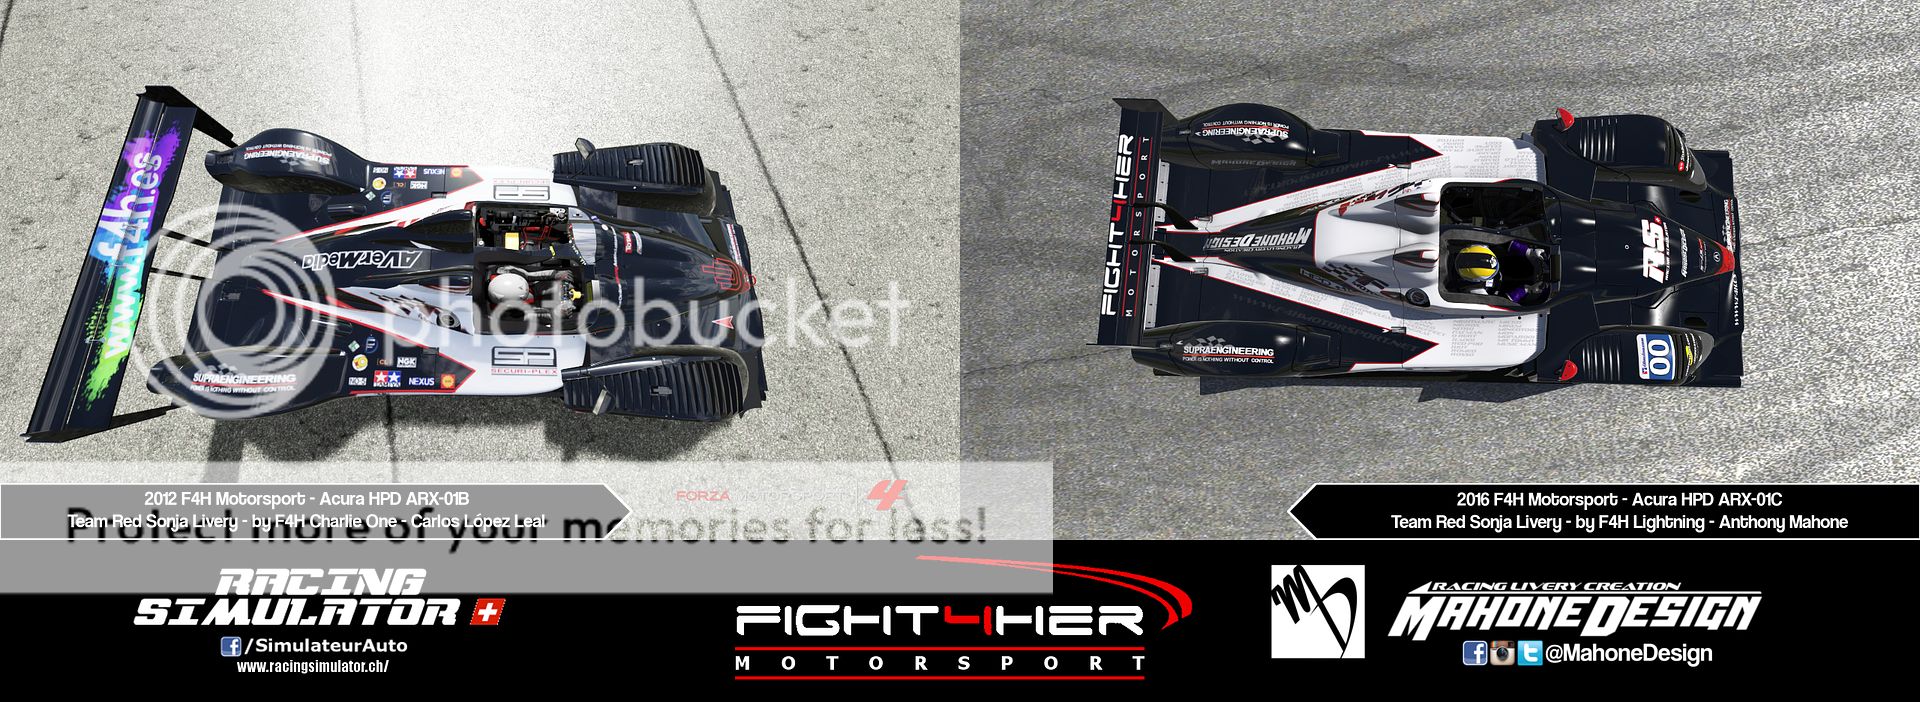 MahoneDesign - Racecar Livery Creation F4H%20Red%20Sonja%20Top